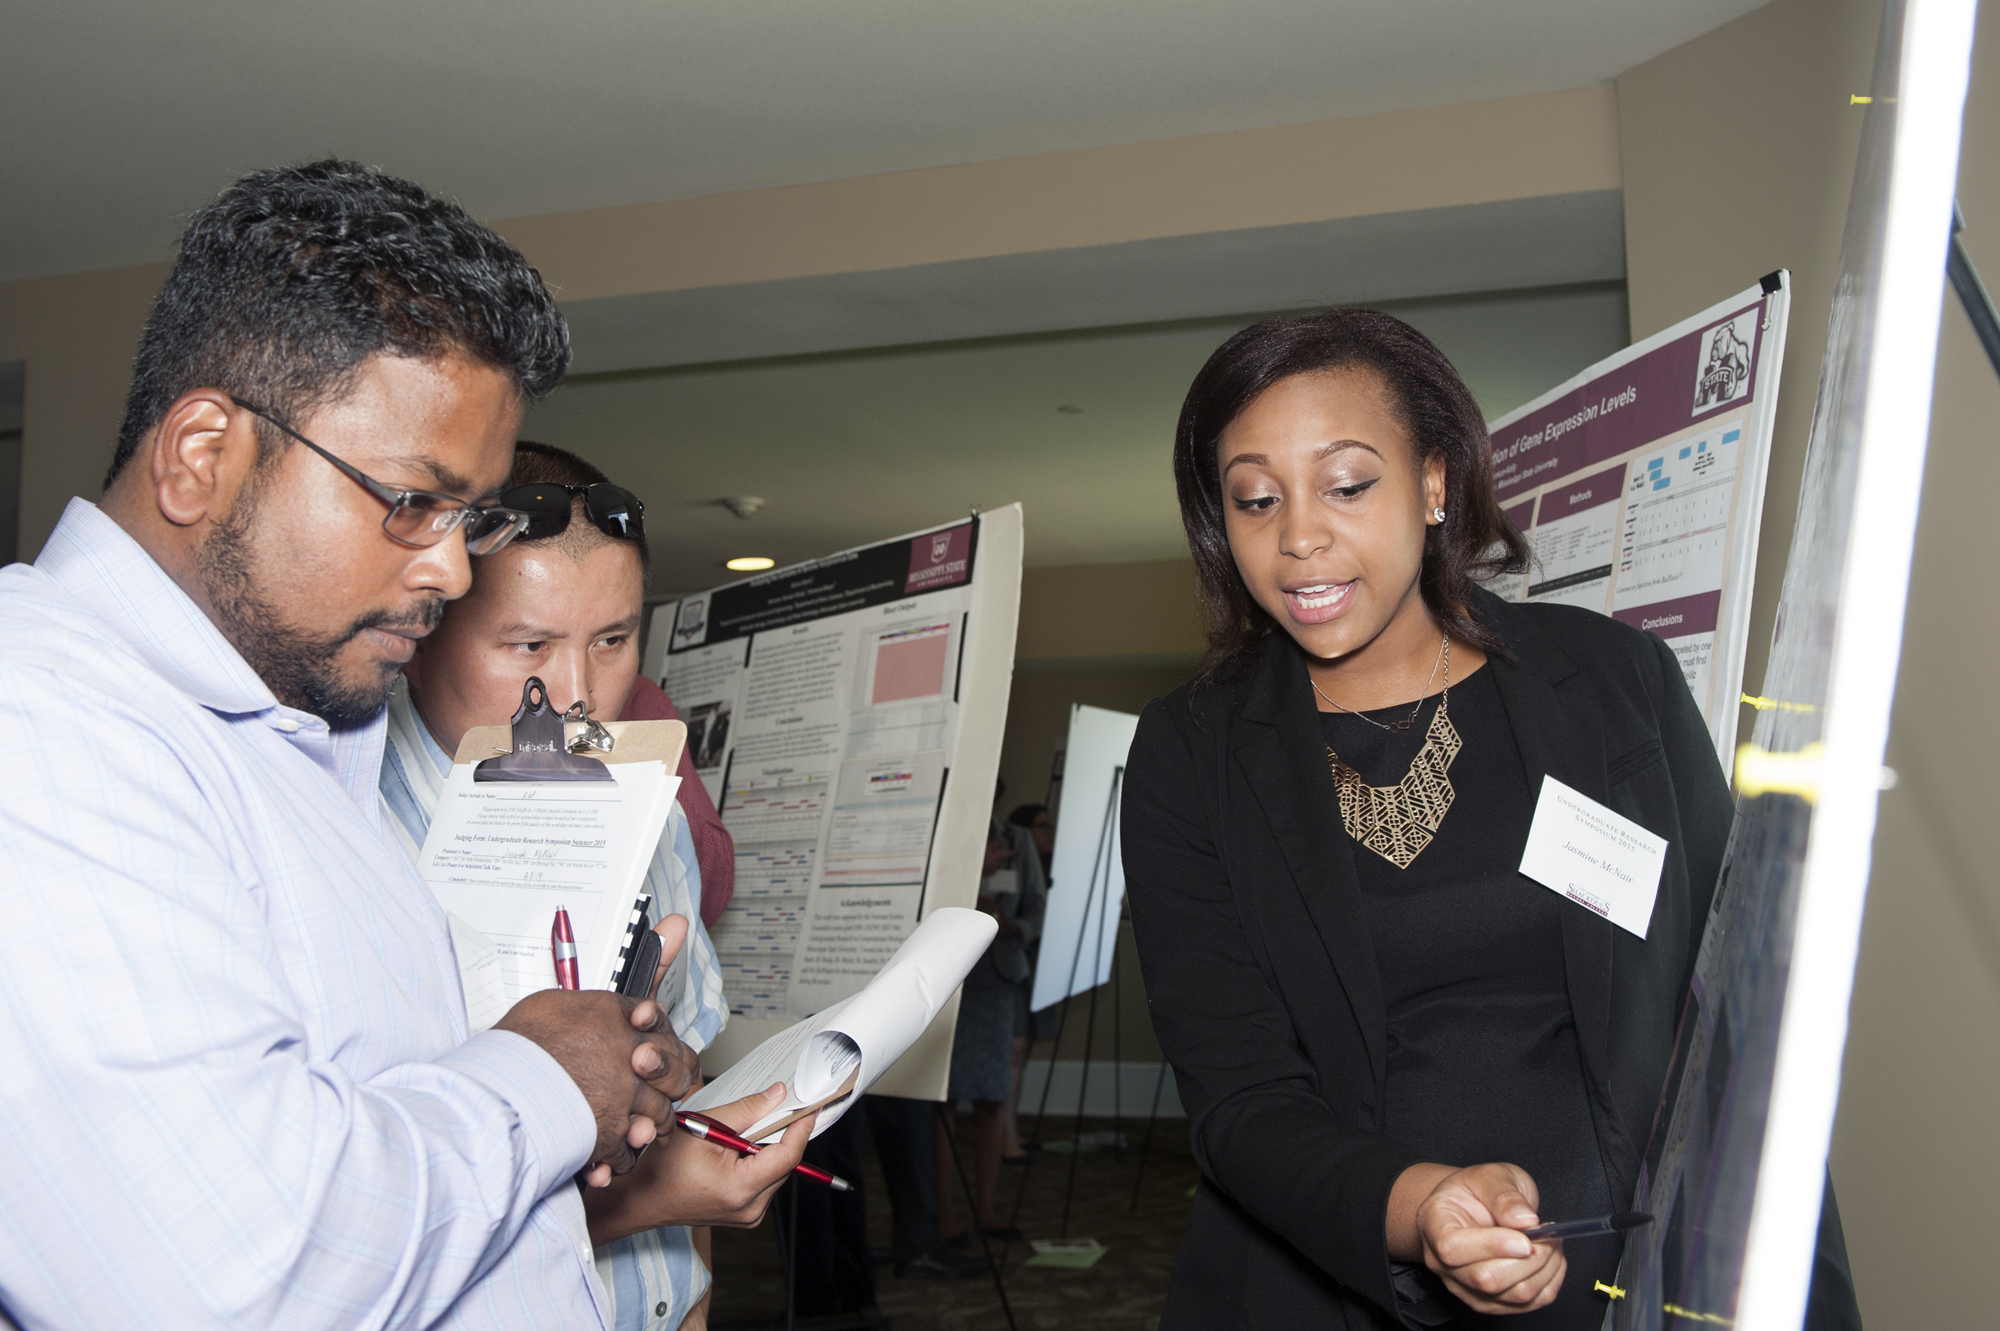 Mississippi State faculty members Raj Prabhu (l) and Thu Dinh look on as freshman Jasmine S. McNair of Ridgeland presented her project during the university's 2015 Undergraduate Summer Research Symposium organized by the Shackouls Honors College. 